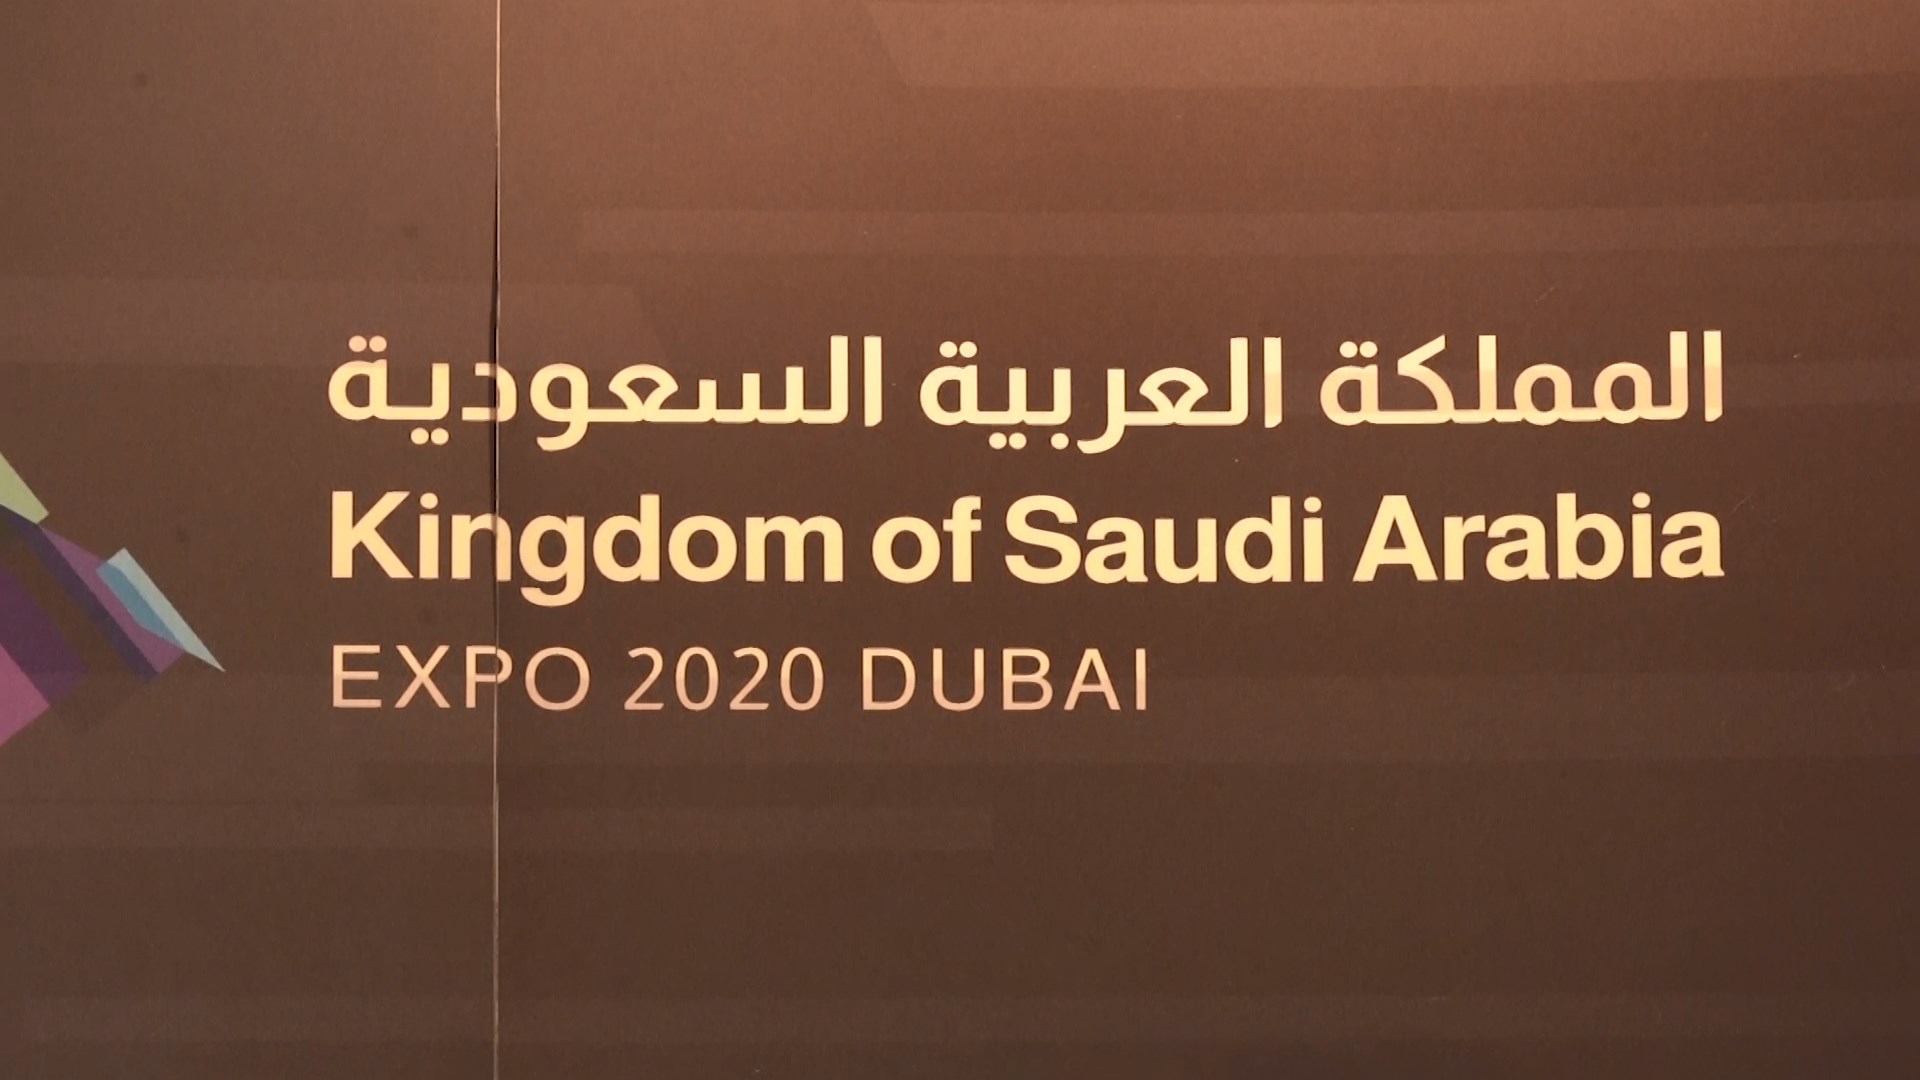 The number of visitors to EXPO 2020 is approaching a million